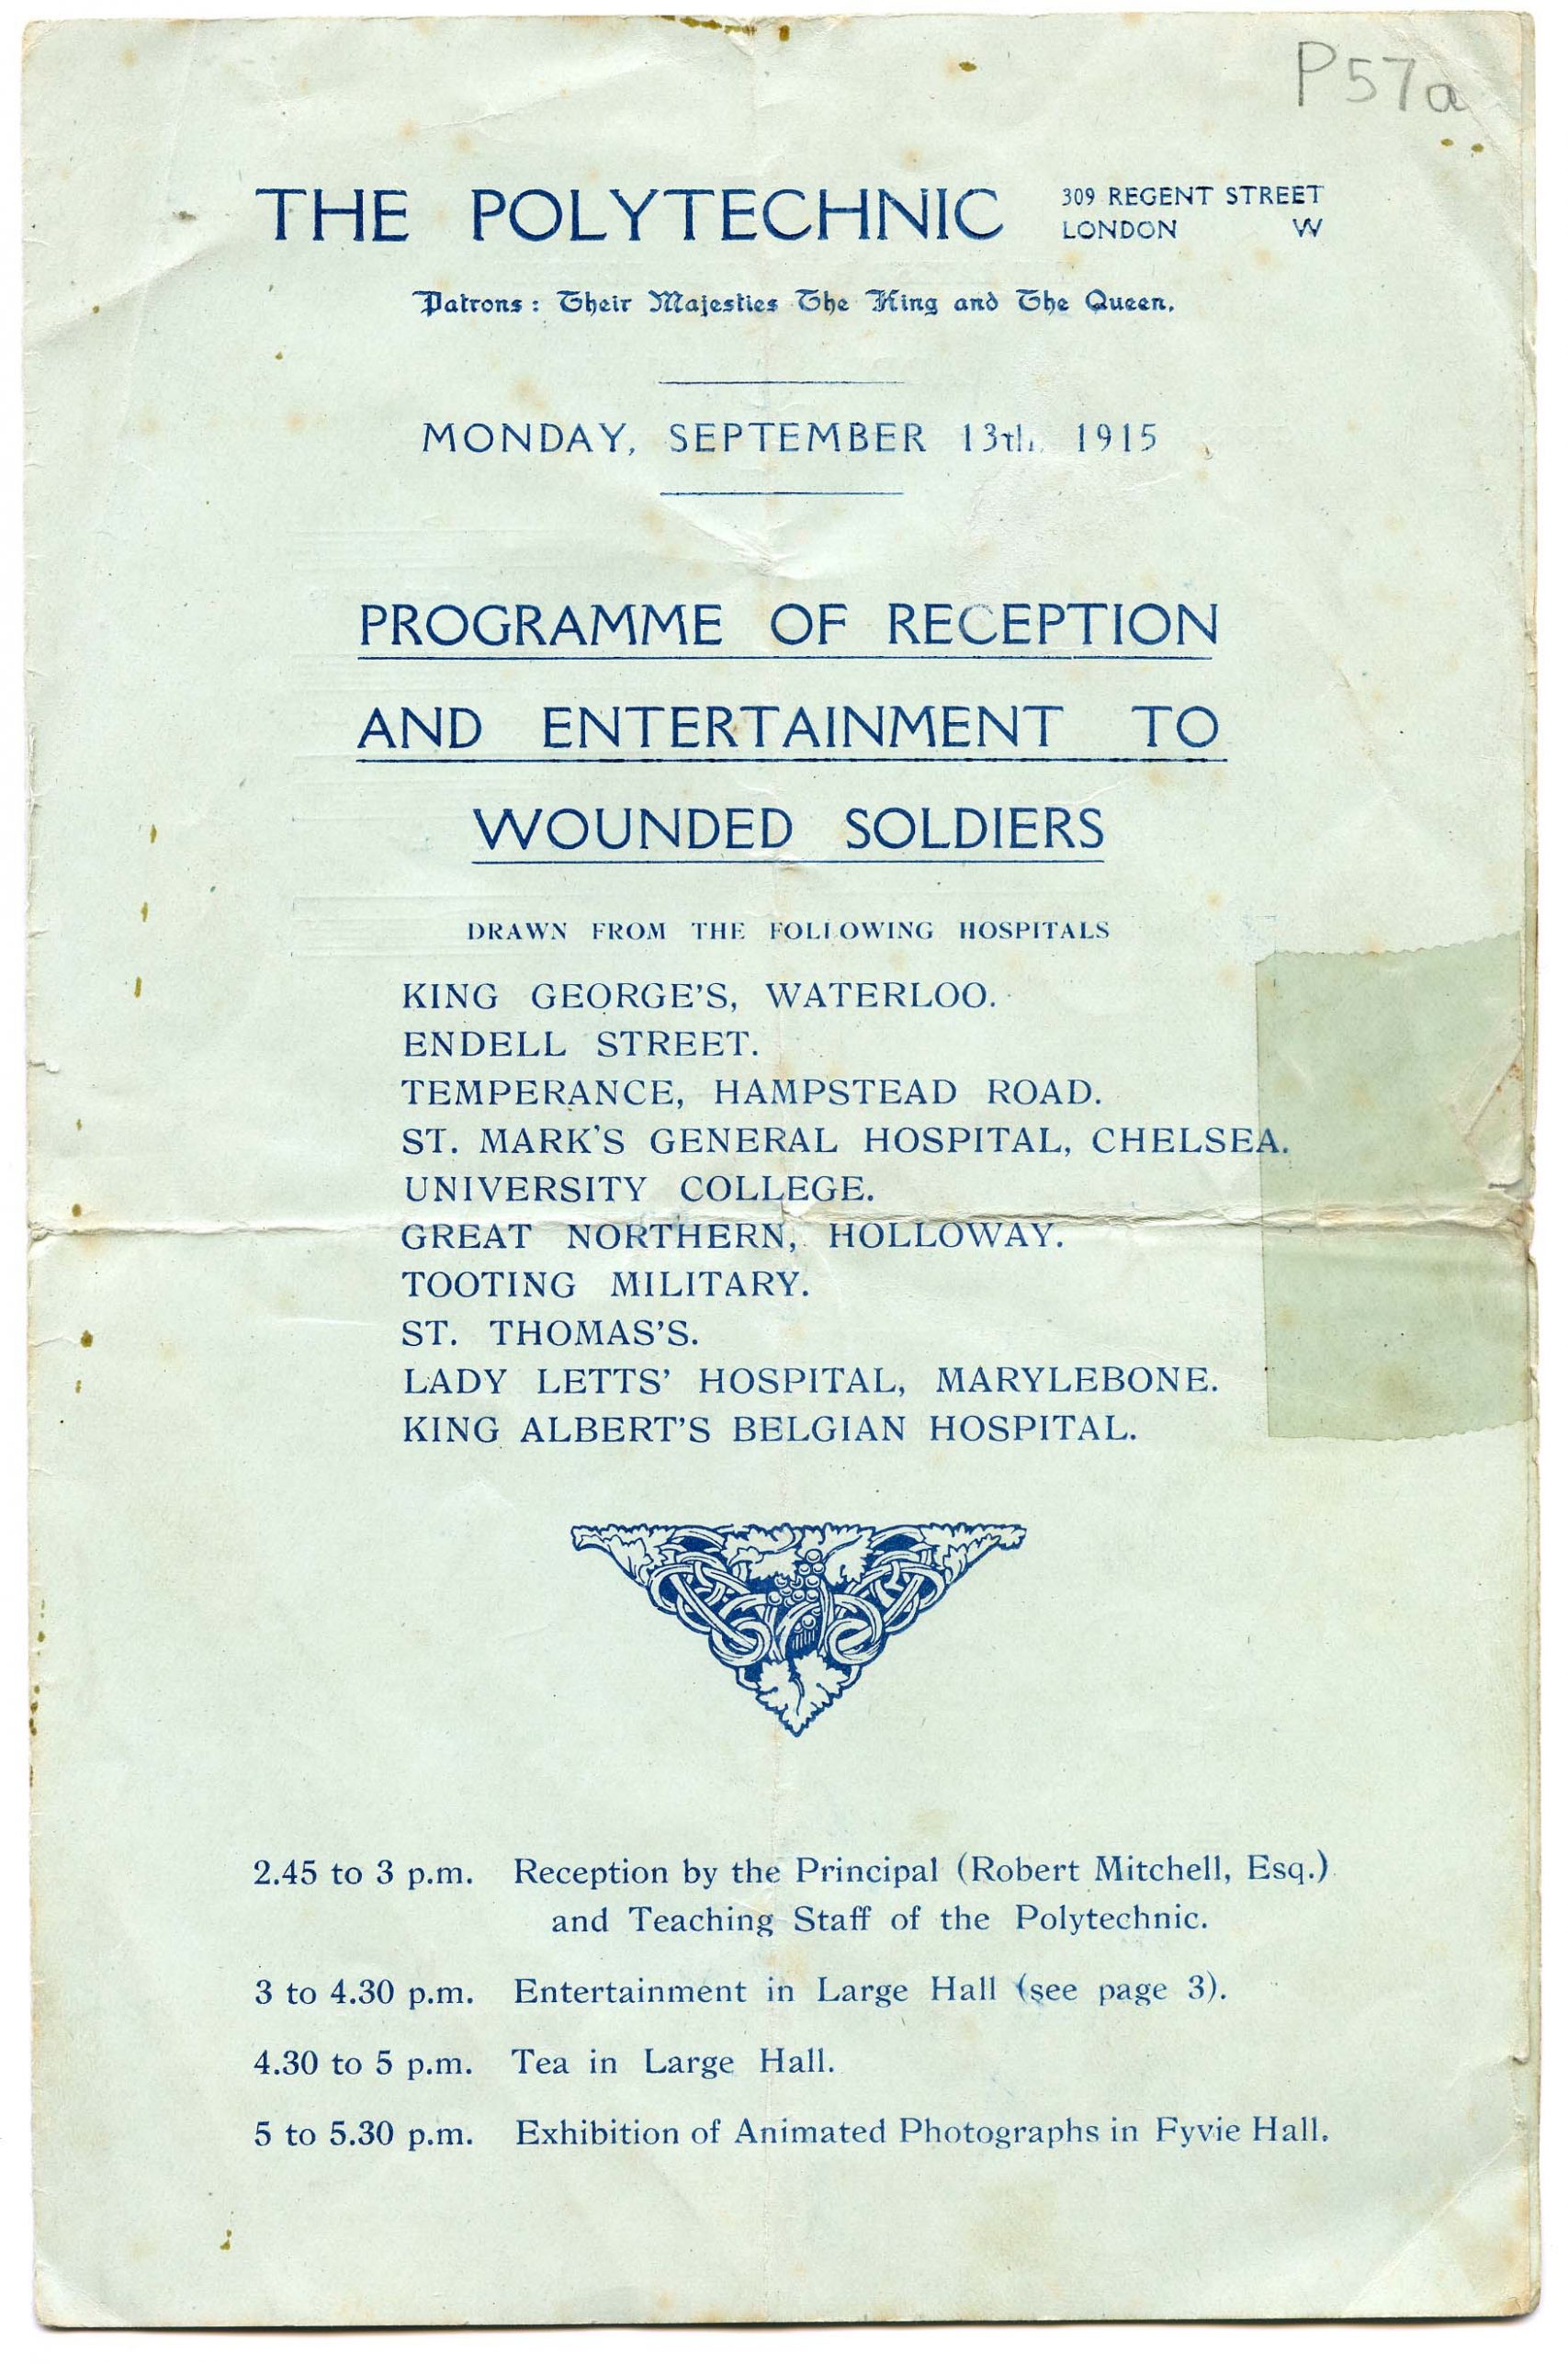 Programme for a reception and entertainment to wounded soldiers on 13th September 1915 at the Poly